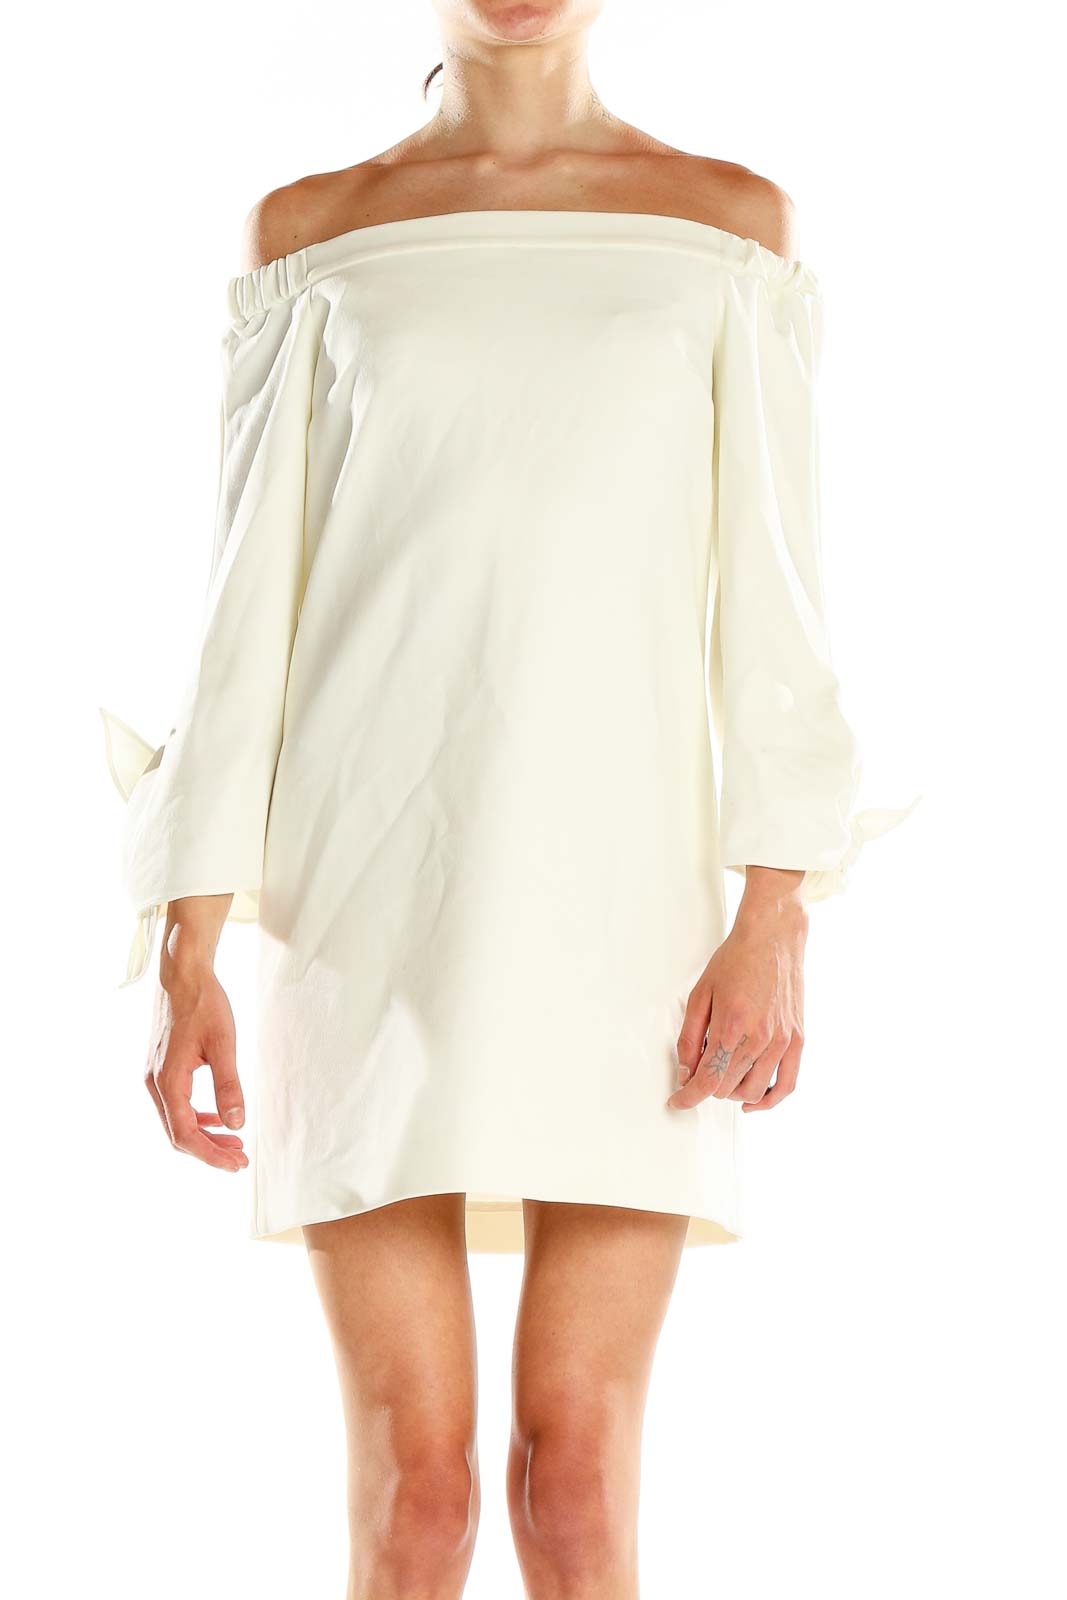 White Classic Off The Shoulder Shift Dress Front